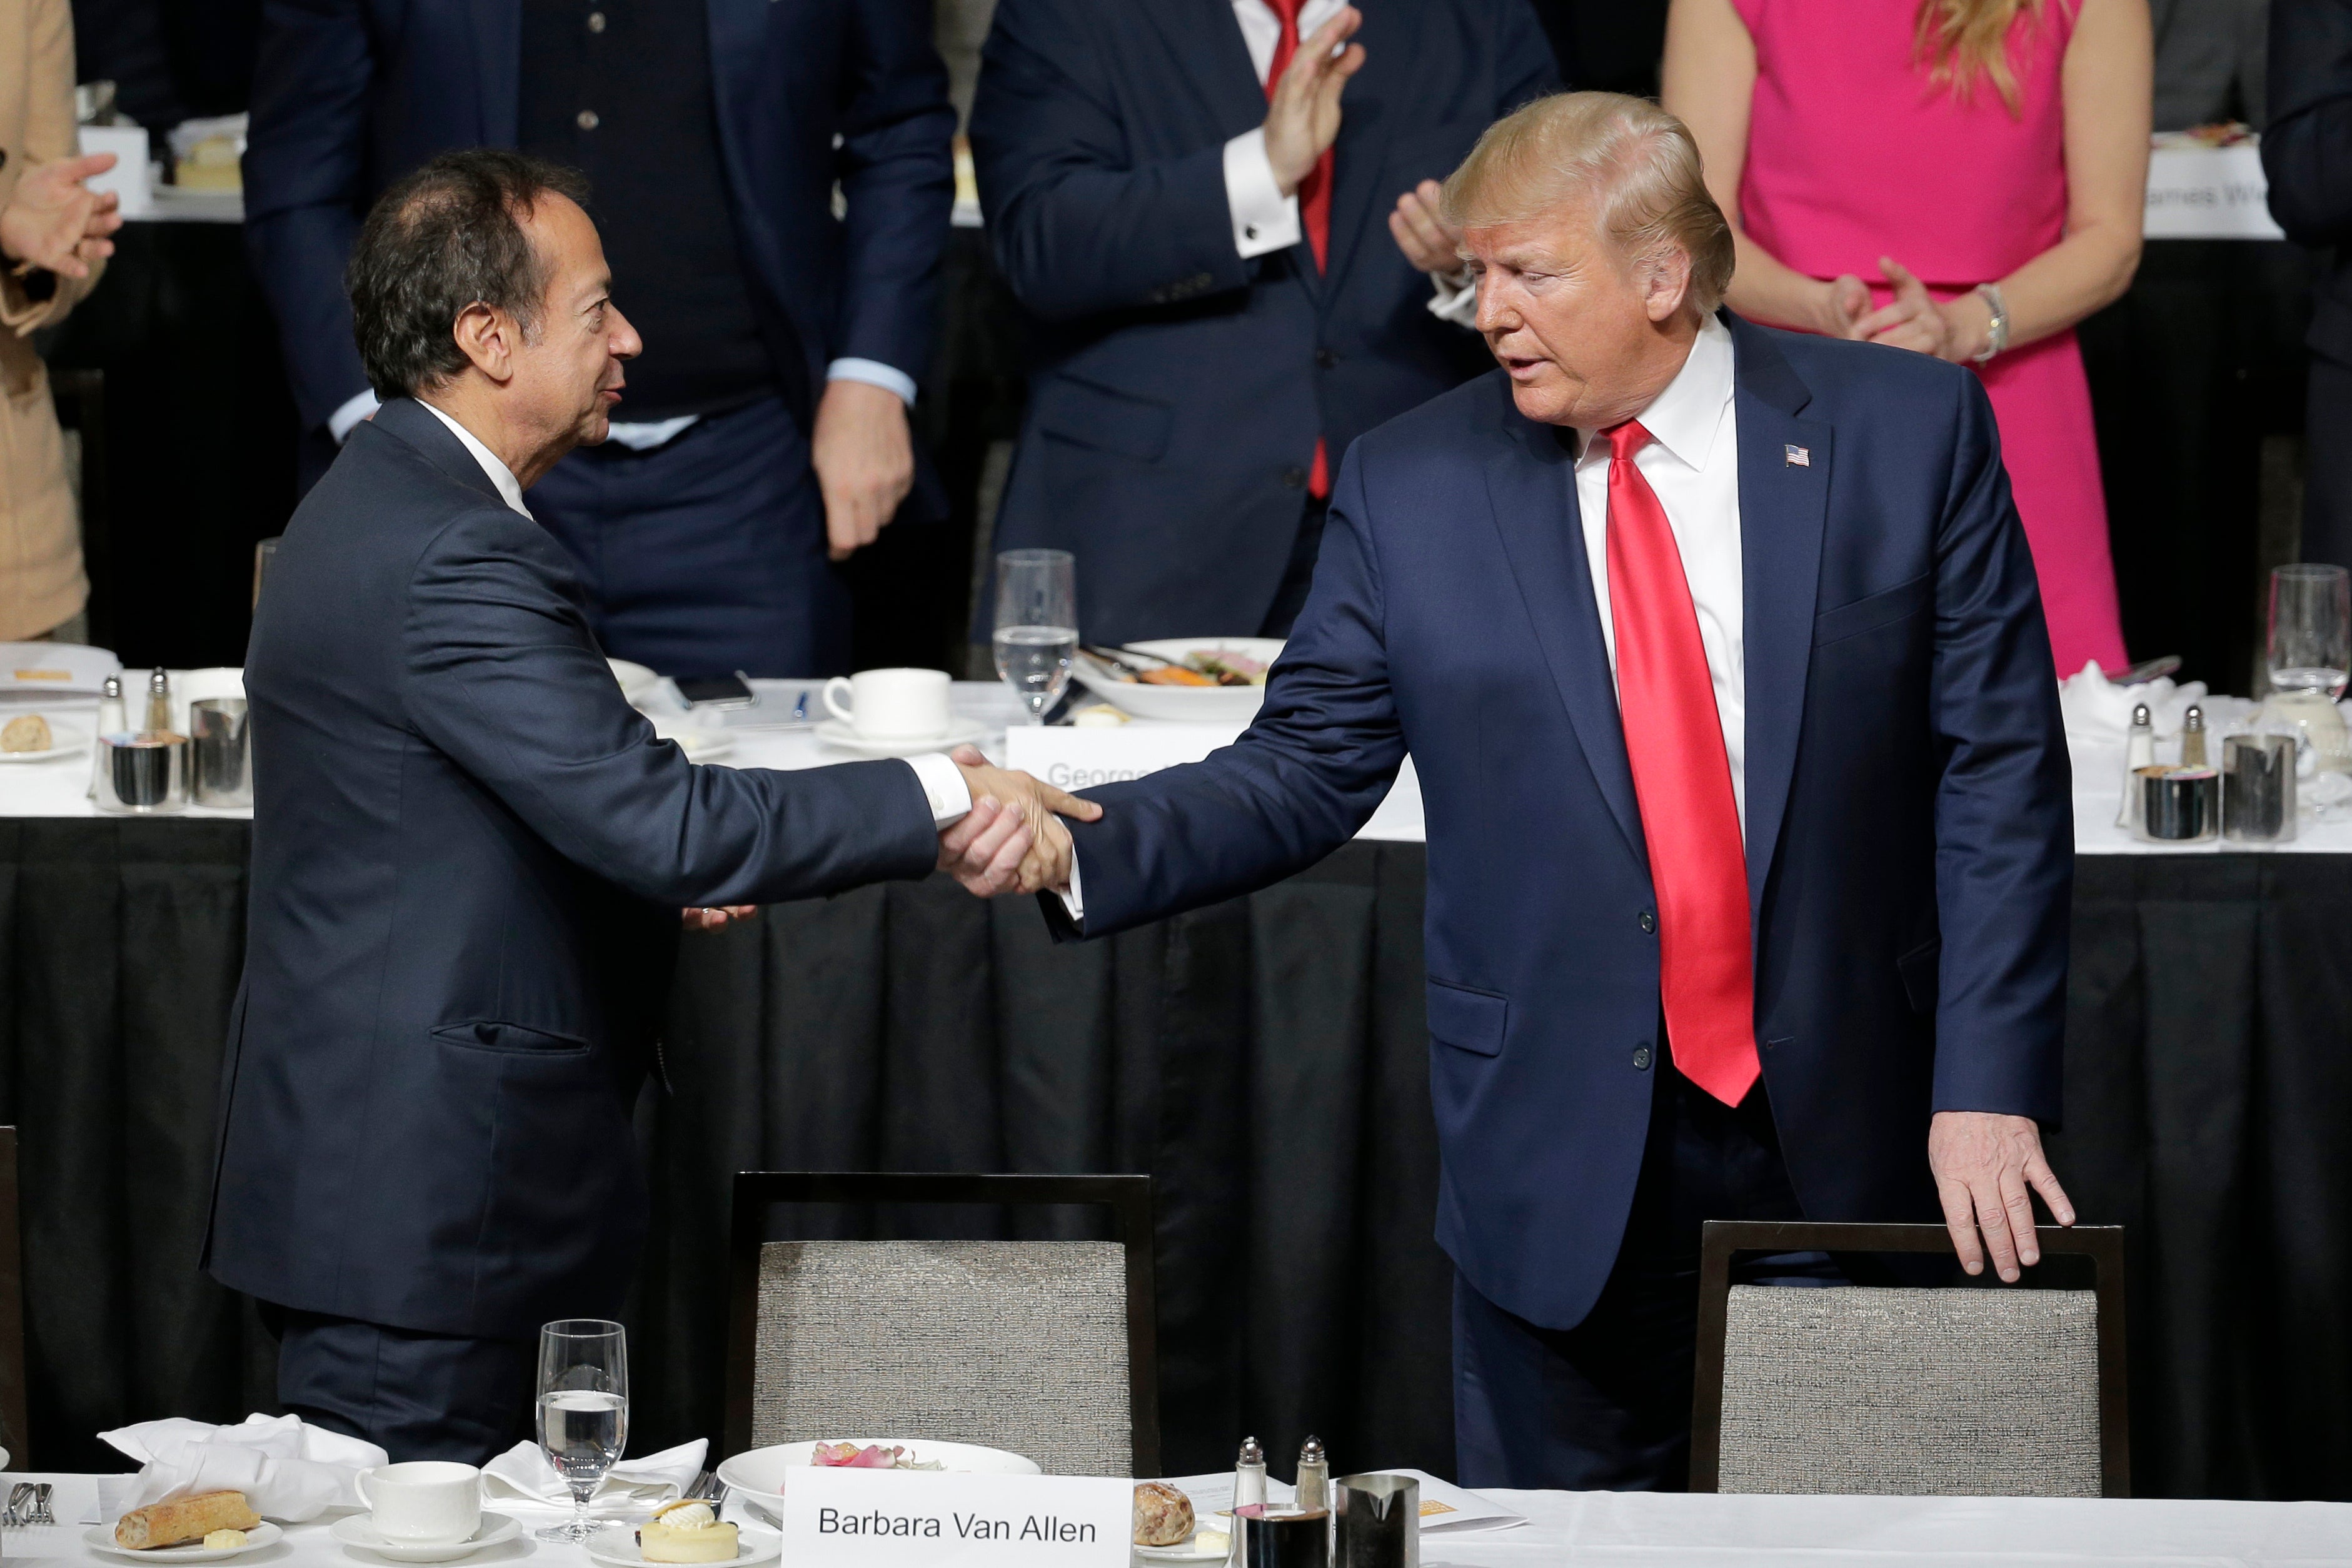 Donald Trump shook hands with John Paulson during a meeting of the Economic Club of New York in November 2019. Mr Paulson is hosting a fundraiser for the Trump campaign on Saturday